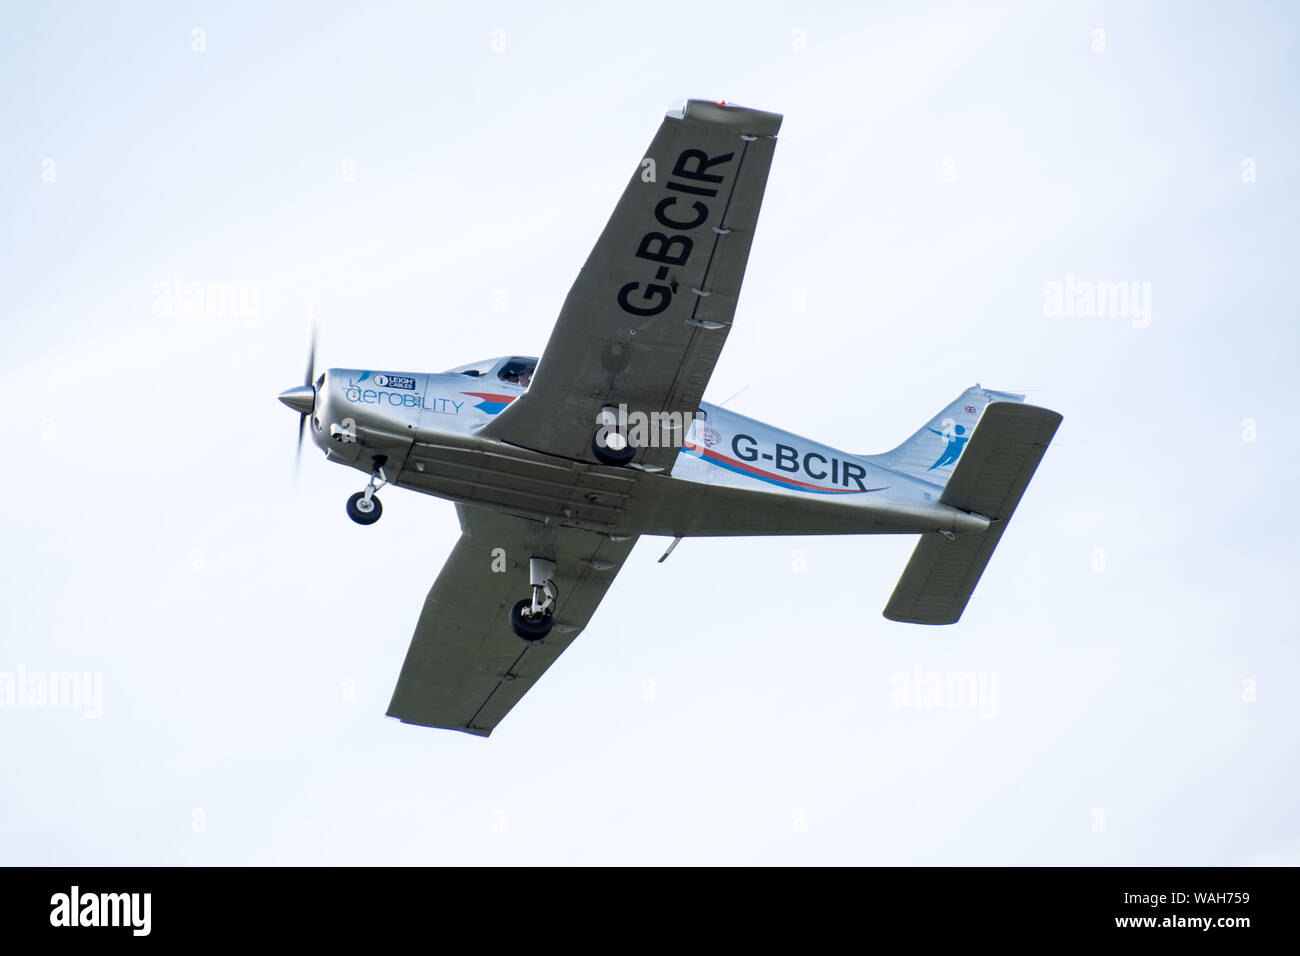 Piper PA-28 Warrior operated by disabled pilot Stock Photo